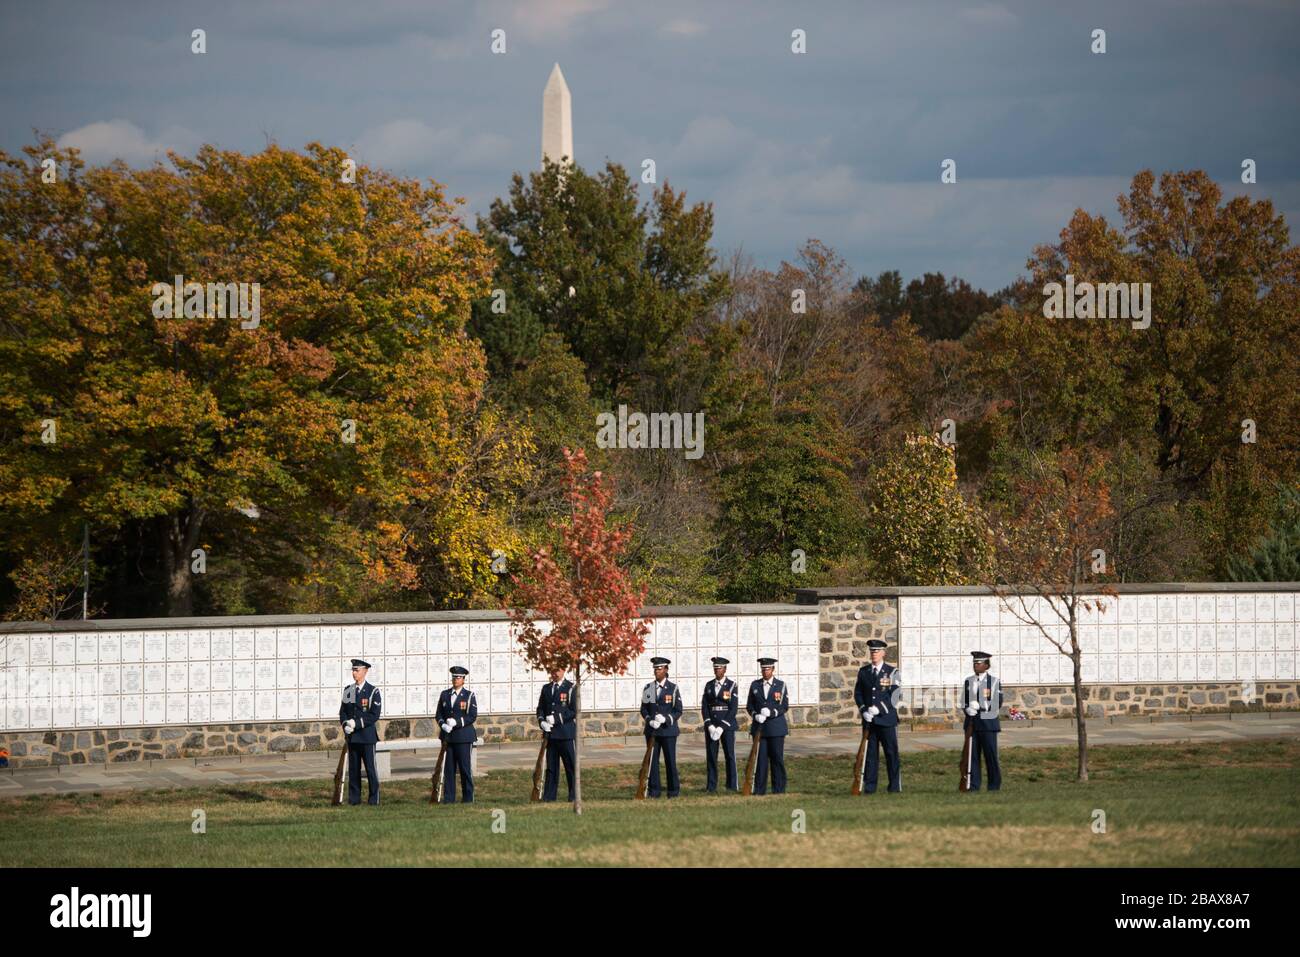 'Members of the U.S. Air Force participate in the graveside service for U.S. Air Force Maj. Candice Ismirle, Nov. 9, 2016, in Arlington, Va. She was buried in Section 76 of Arlington National Cemetery. (U.S. Army photo by Rachel Larue/Arlington National Cemetery/released); 9 November 2016, 14:32; Graveside service for U.S. Air Force Maj. Candice Ismirle; Arlington National Cemetery; ' Stock Photo